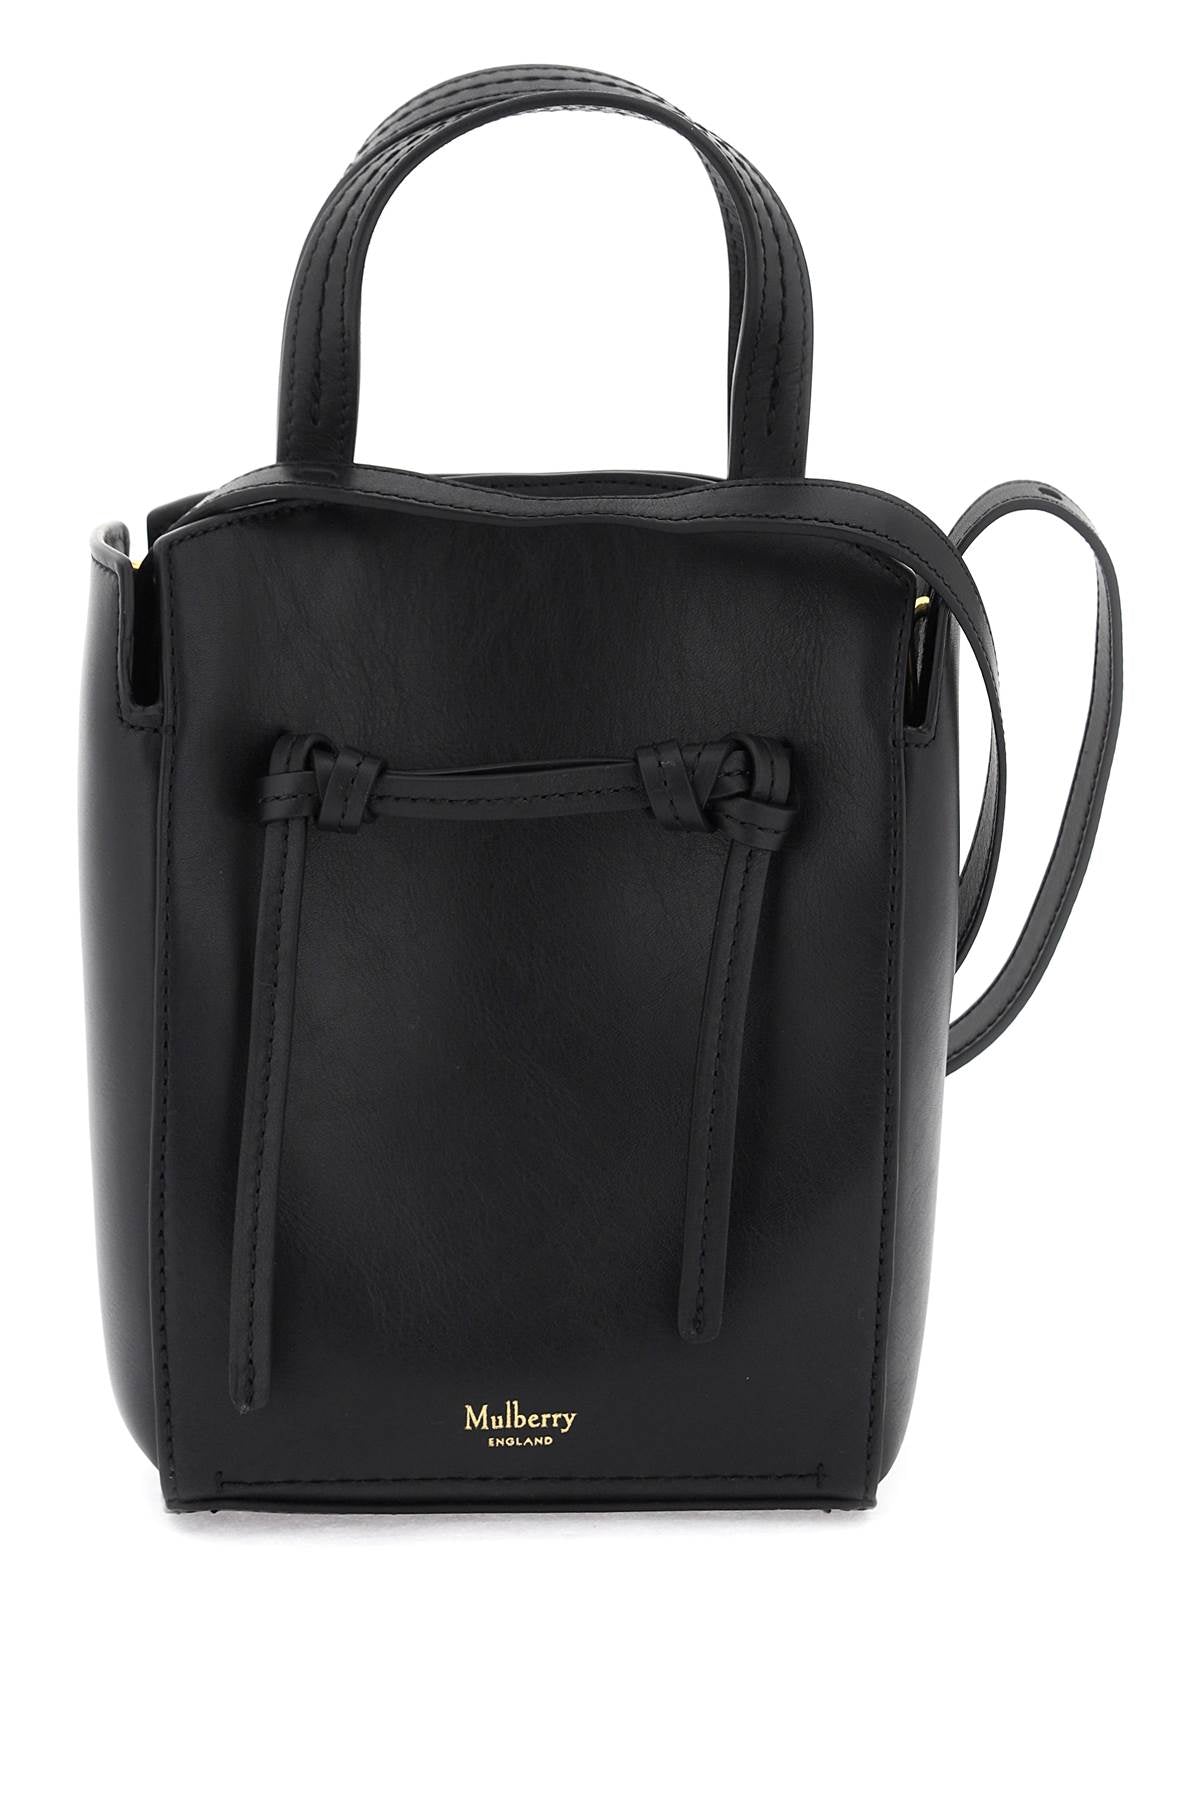 MULBERRY Mini Clovelly Black Leather Tote Bag with Gold Accents and Adjustable Strap